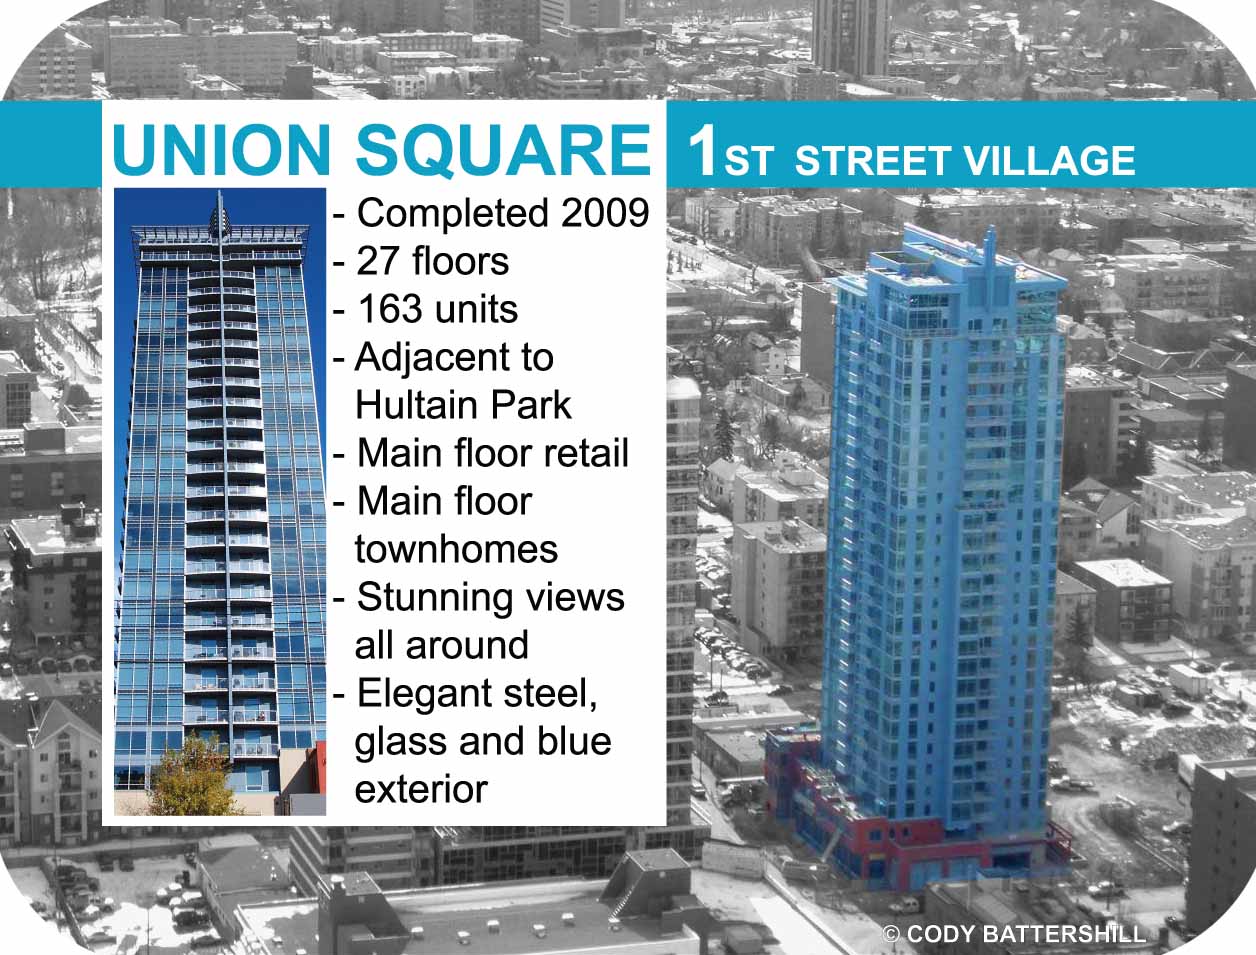 Union Square Condos first street village - Infographic